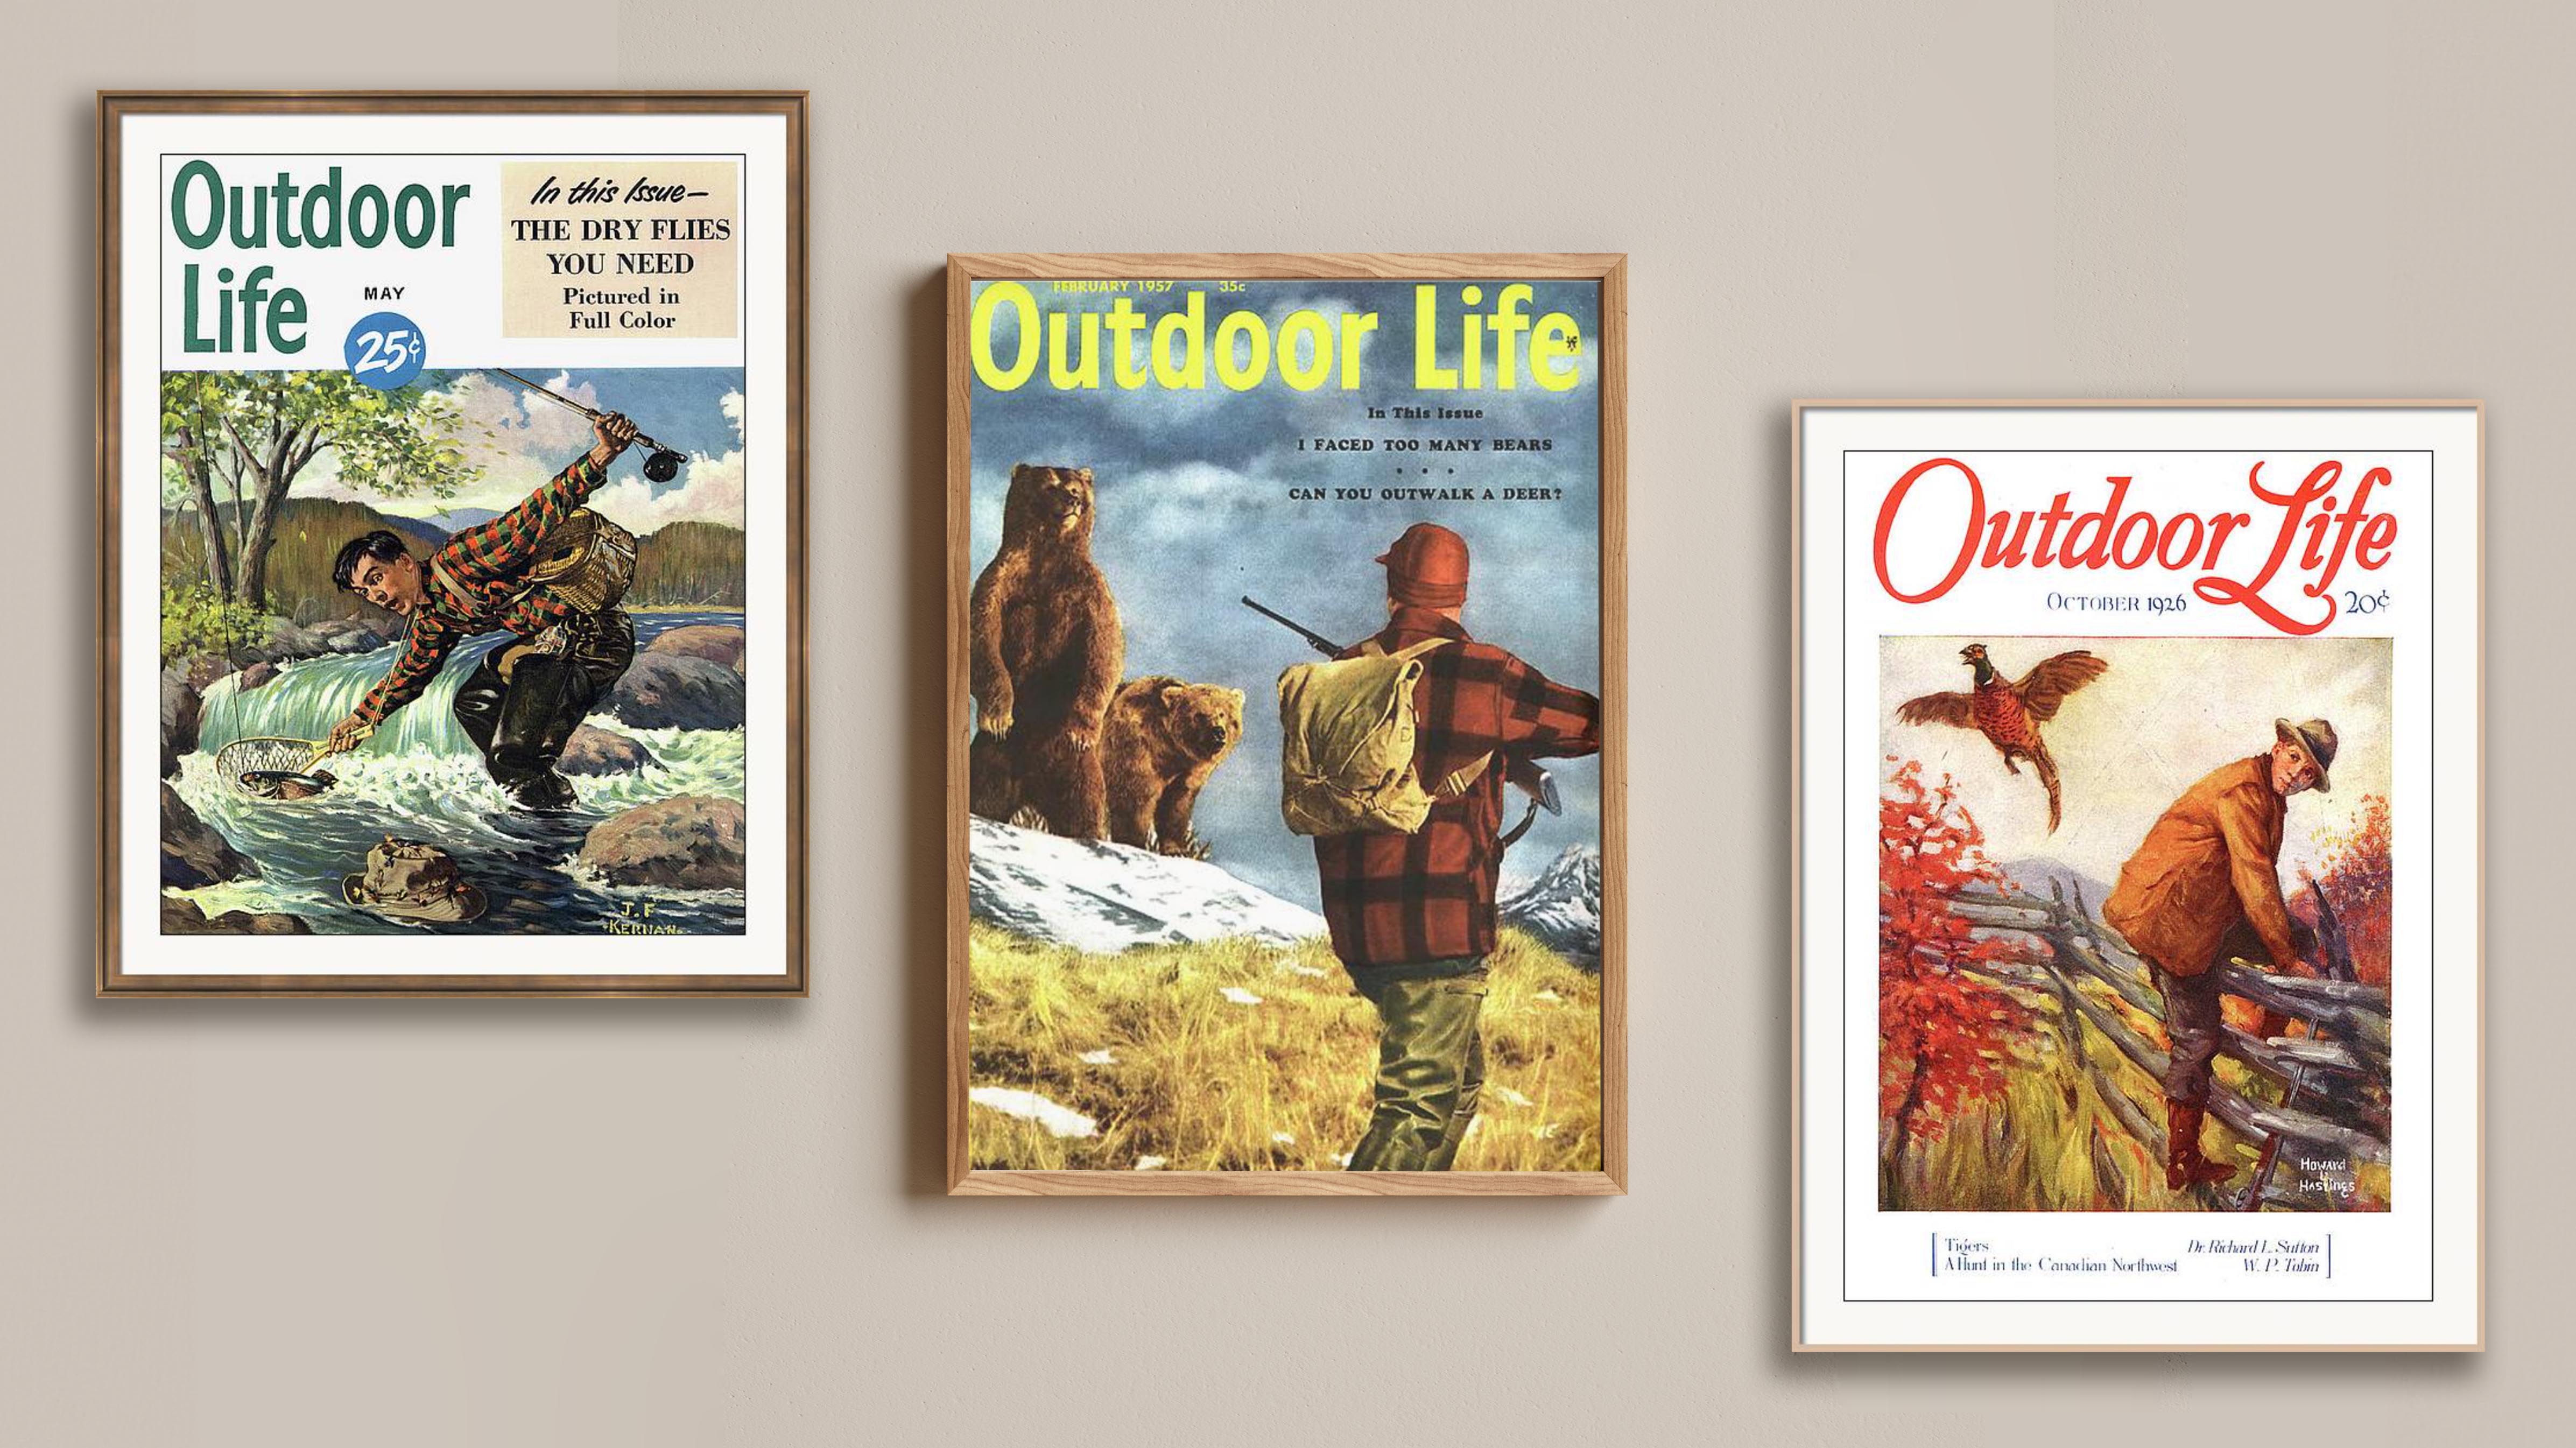 Three outdoor life covers.